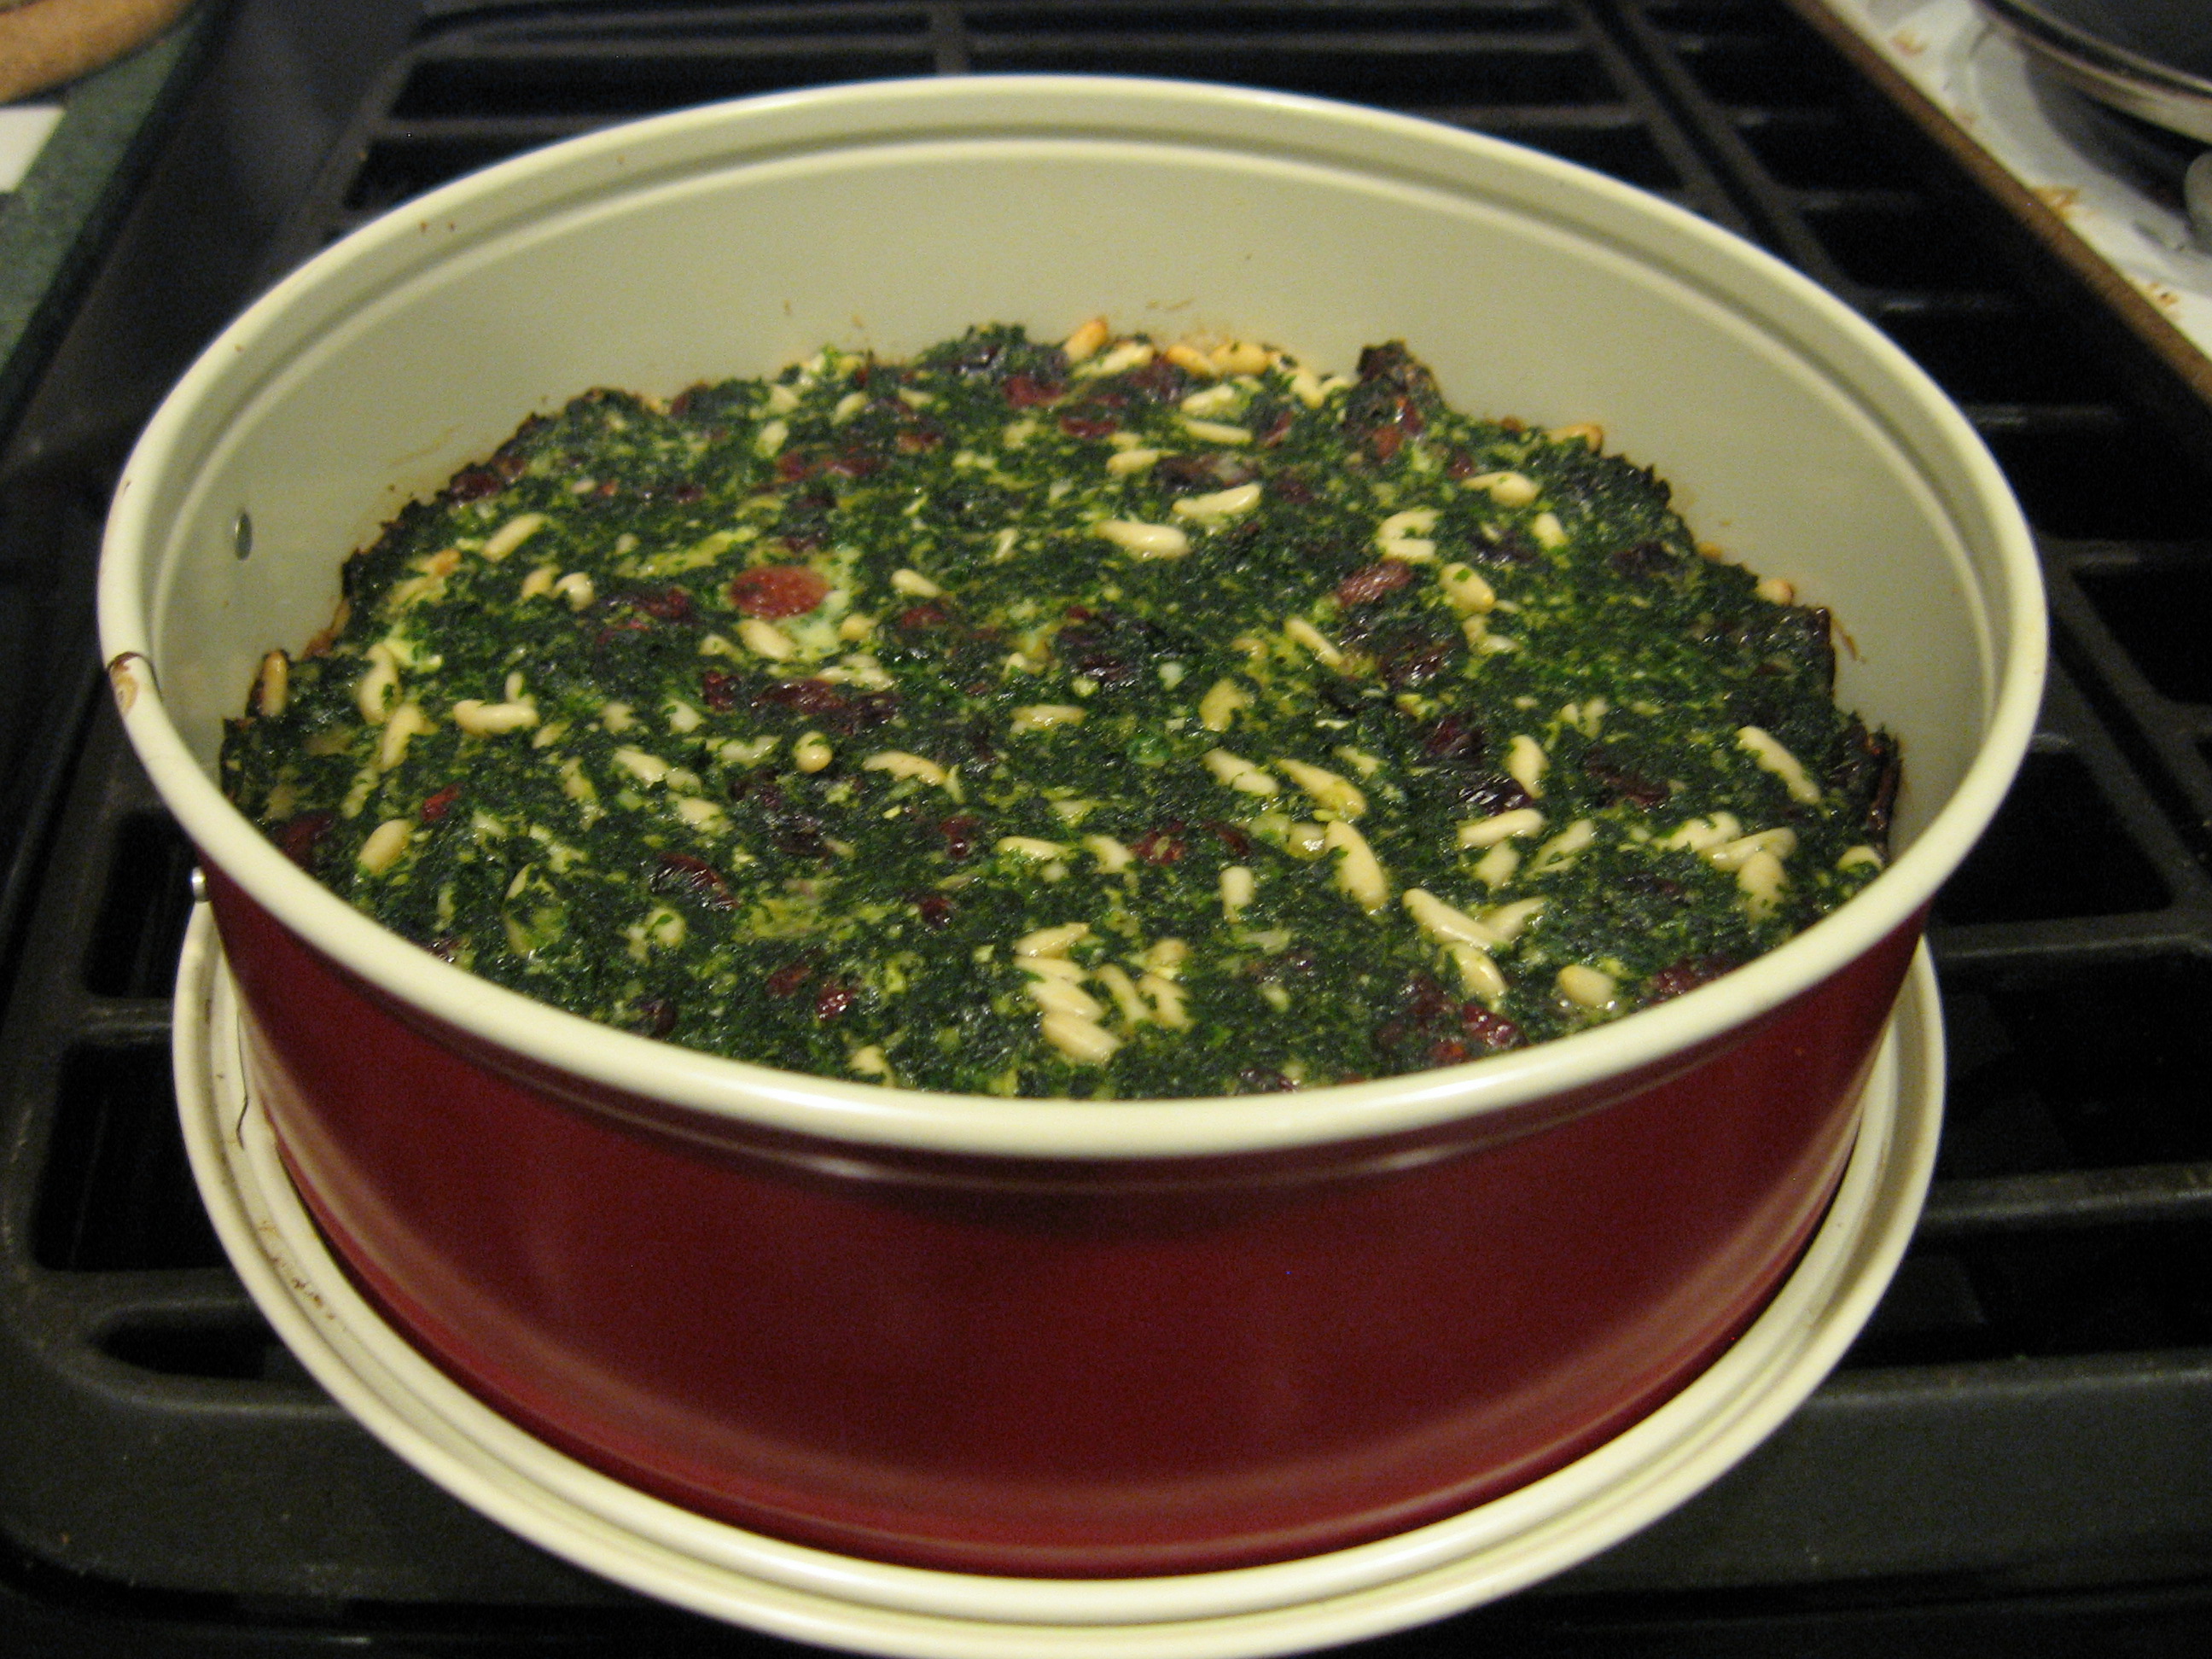 Cranberry Kale Tart with Pine Nuts